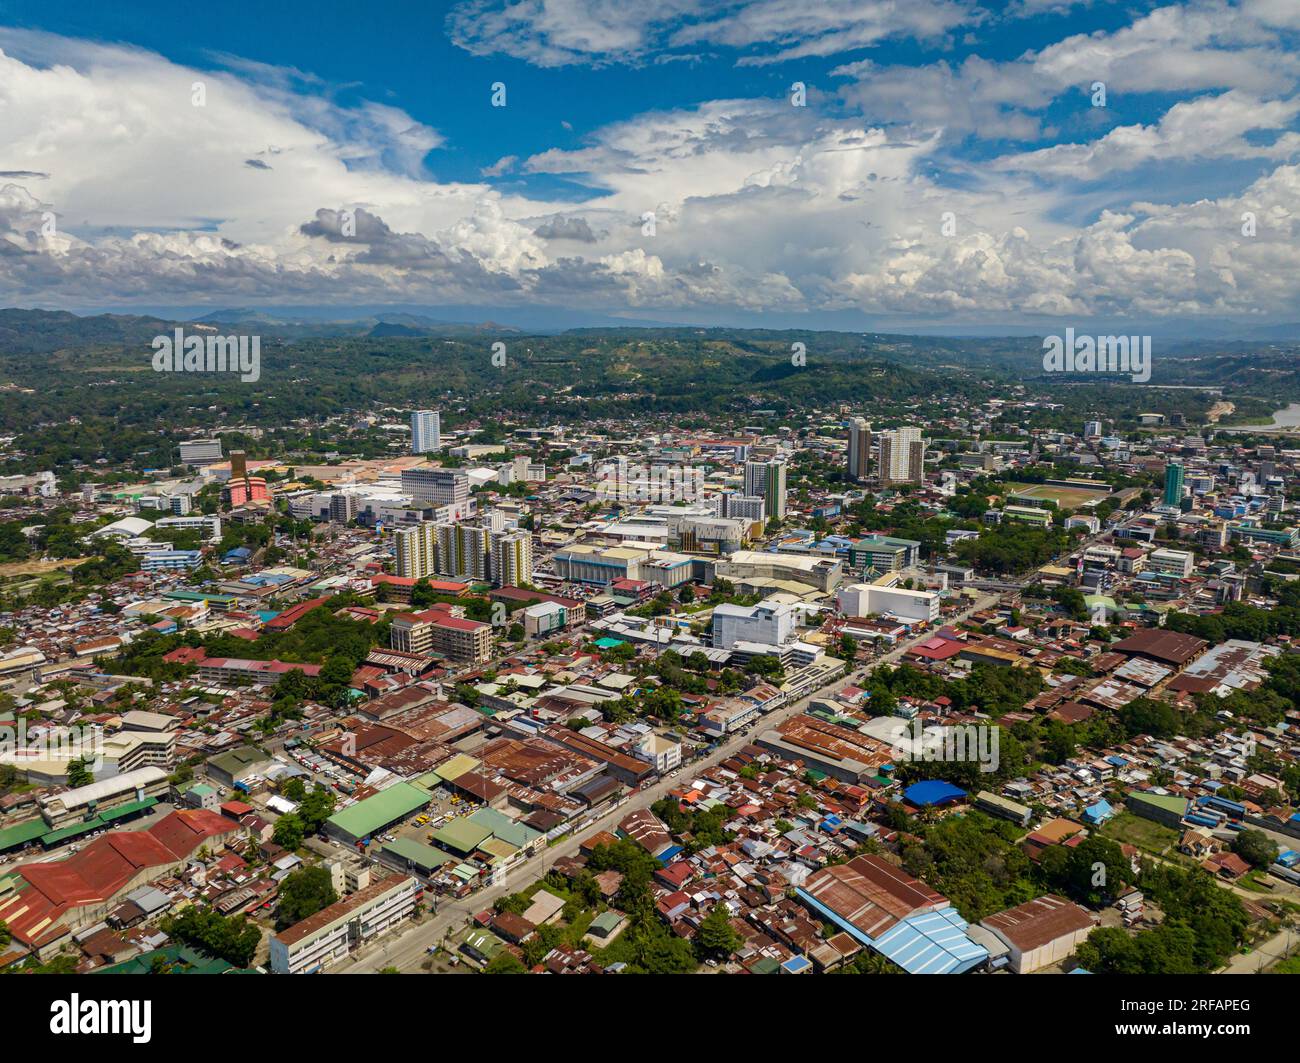 Beatiful city and blue sky and clouds in Cagayan de Oro. Northern Mindanao, Philippines. Cityscape. Stock Photo